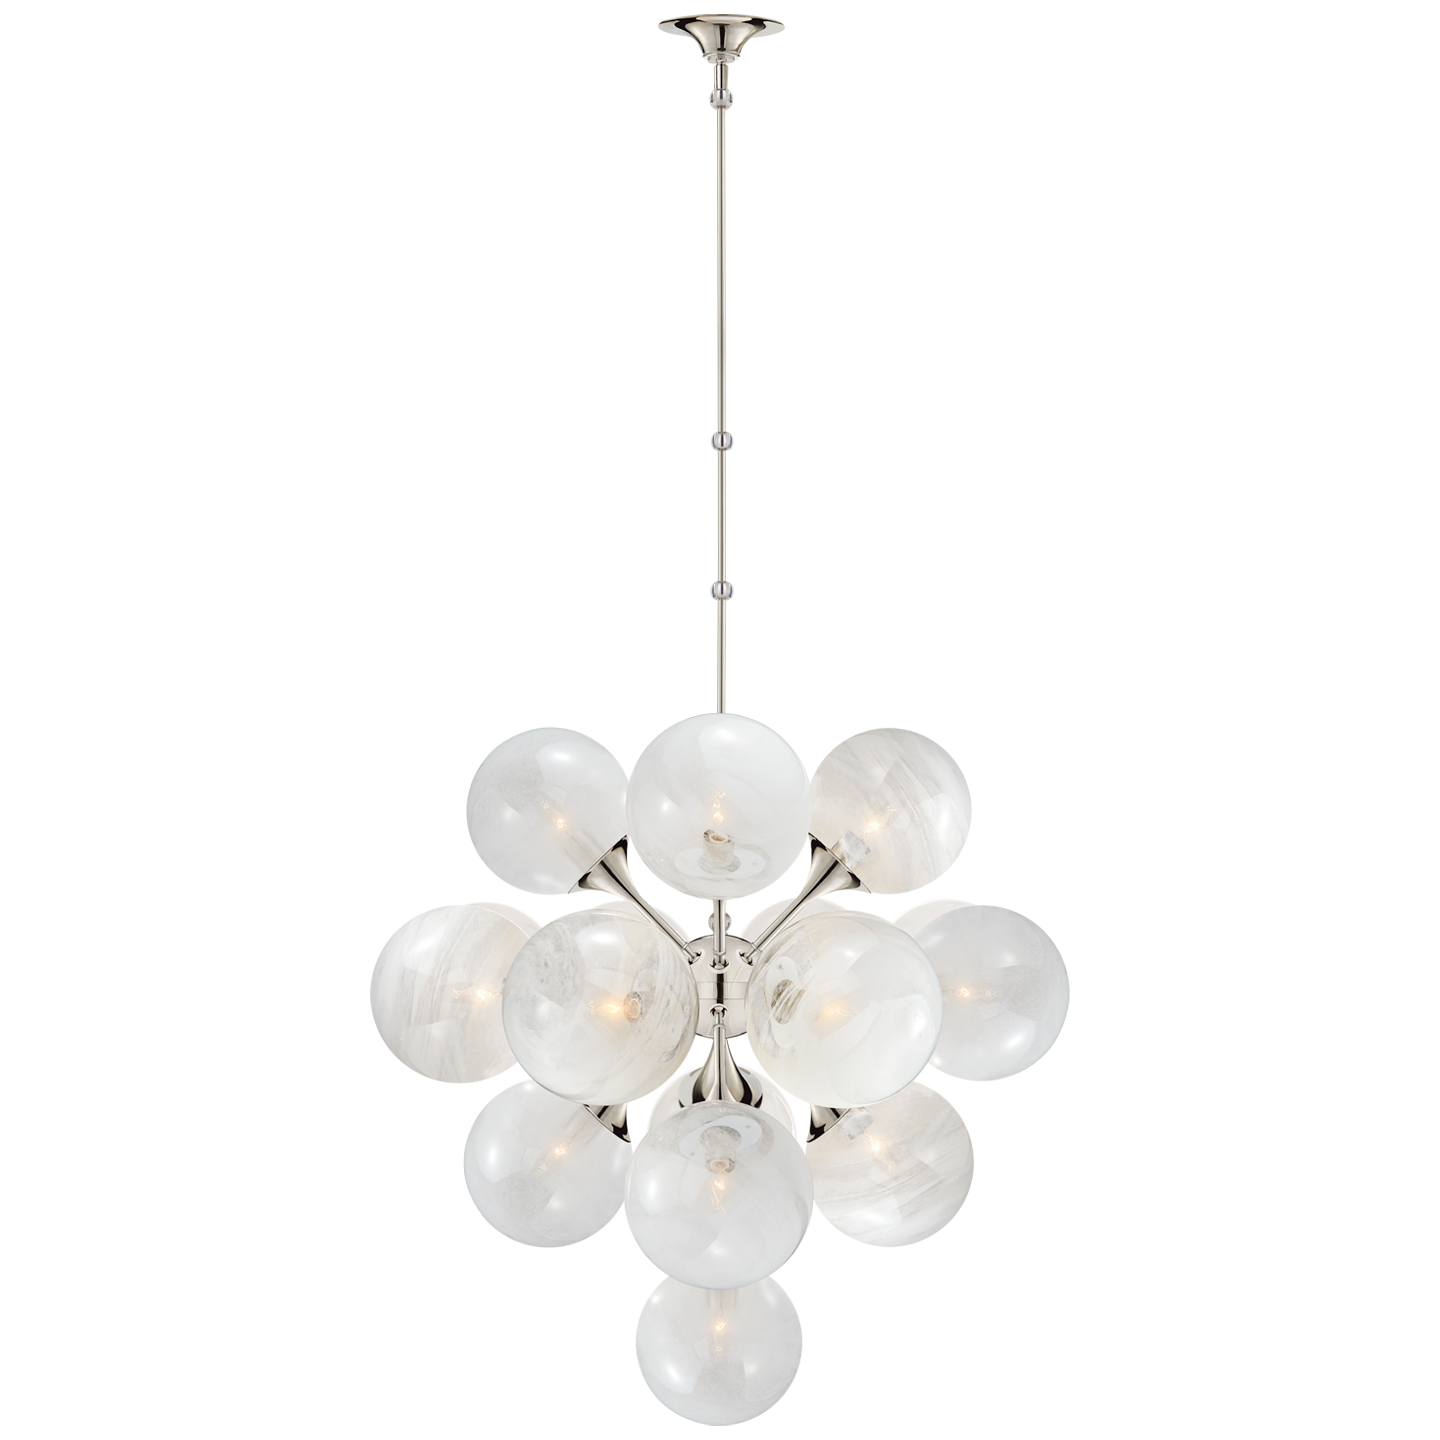 We love the white strie glass globes on this Cristol Large Chandelier. It brings a stunning and unique look to any living room, dining room, or kitchen  Designer: AERIN